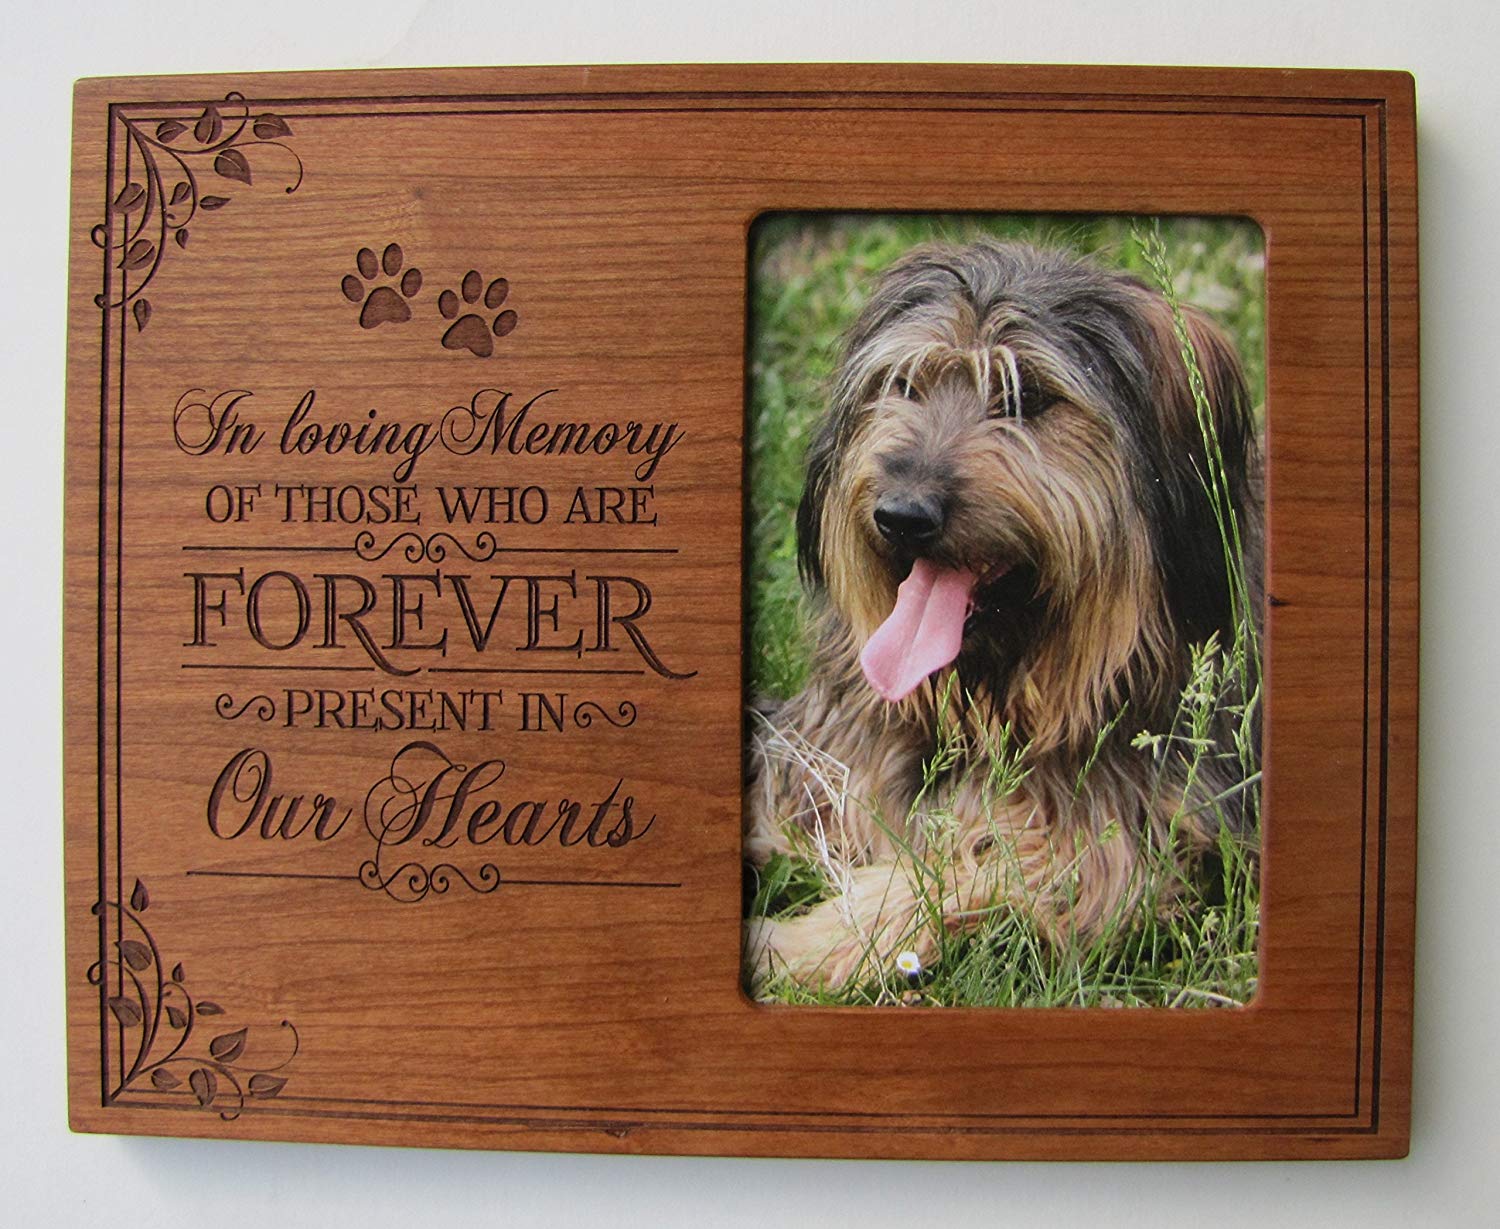 Wooden Memorial 8x10 Picture Frame for Pet holds 4x6 photo In Loving Memory